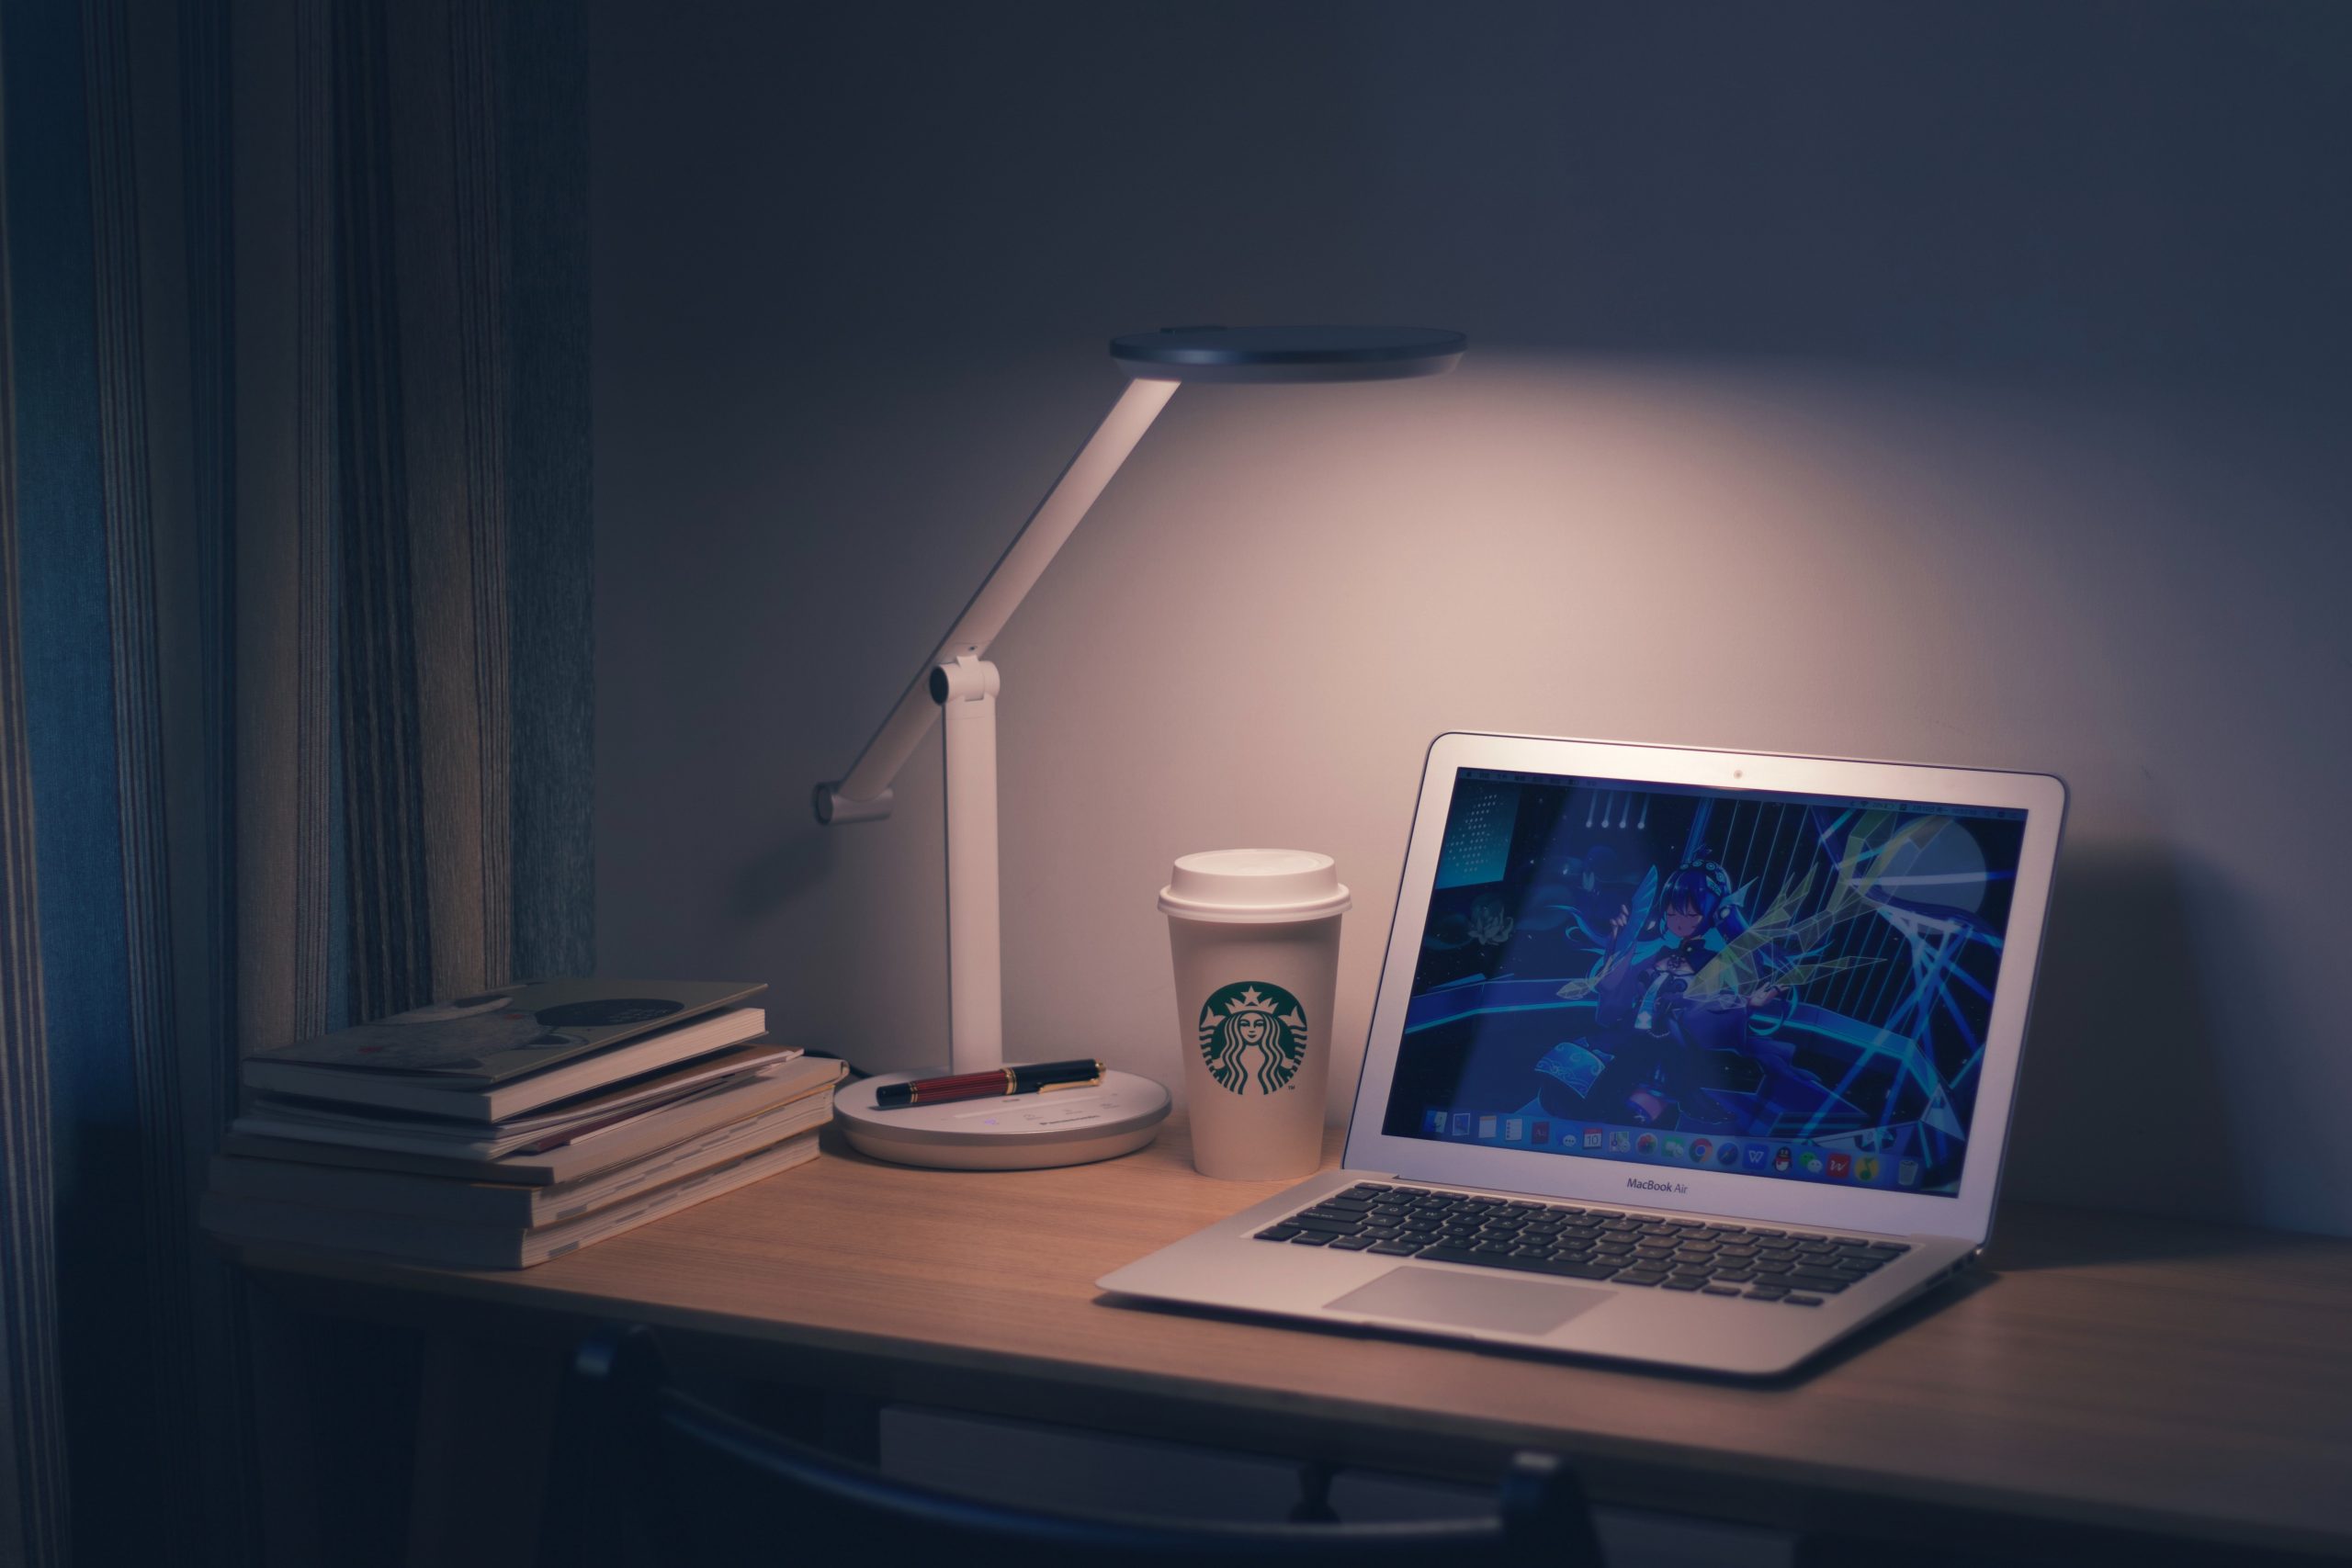 A hazy desk light shines on a wooden desk with a laptop and Starbucks coffee cup.